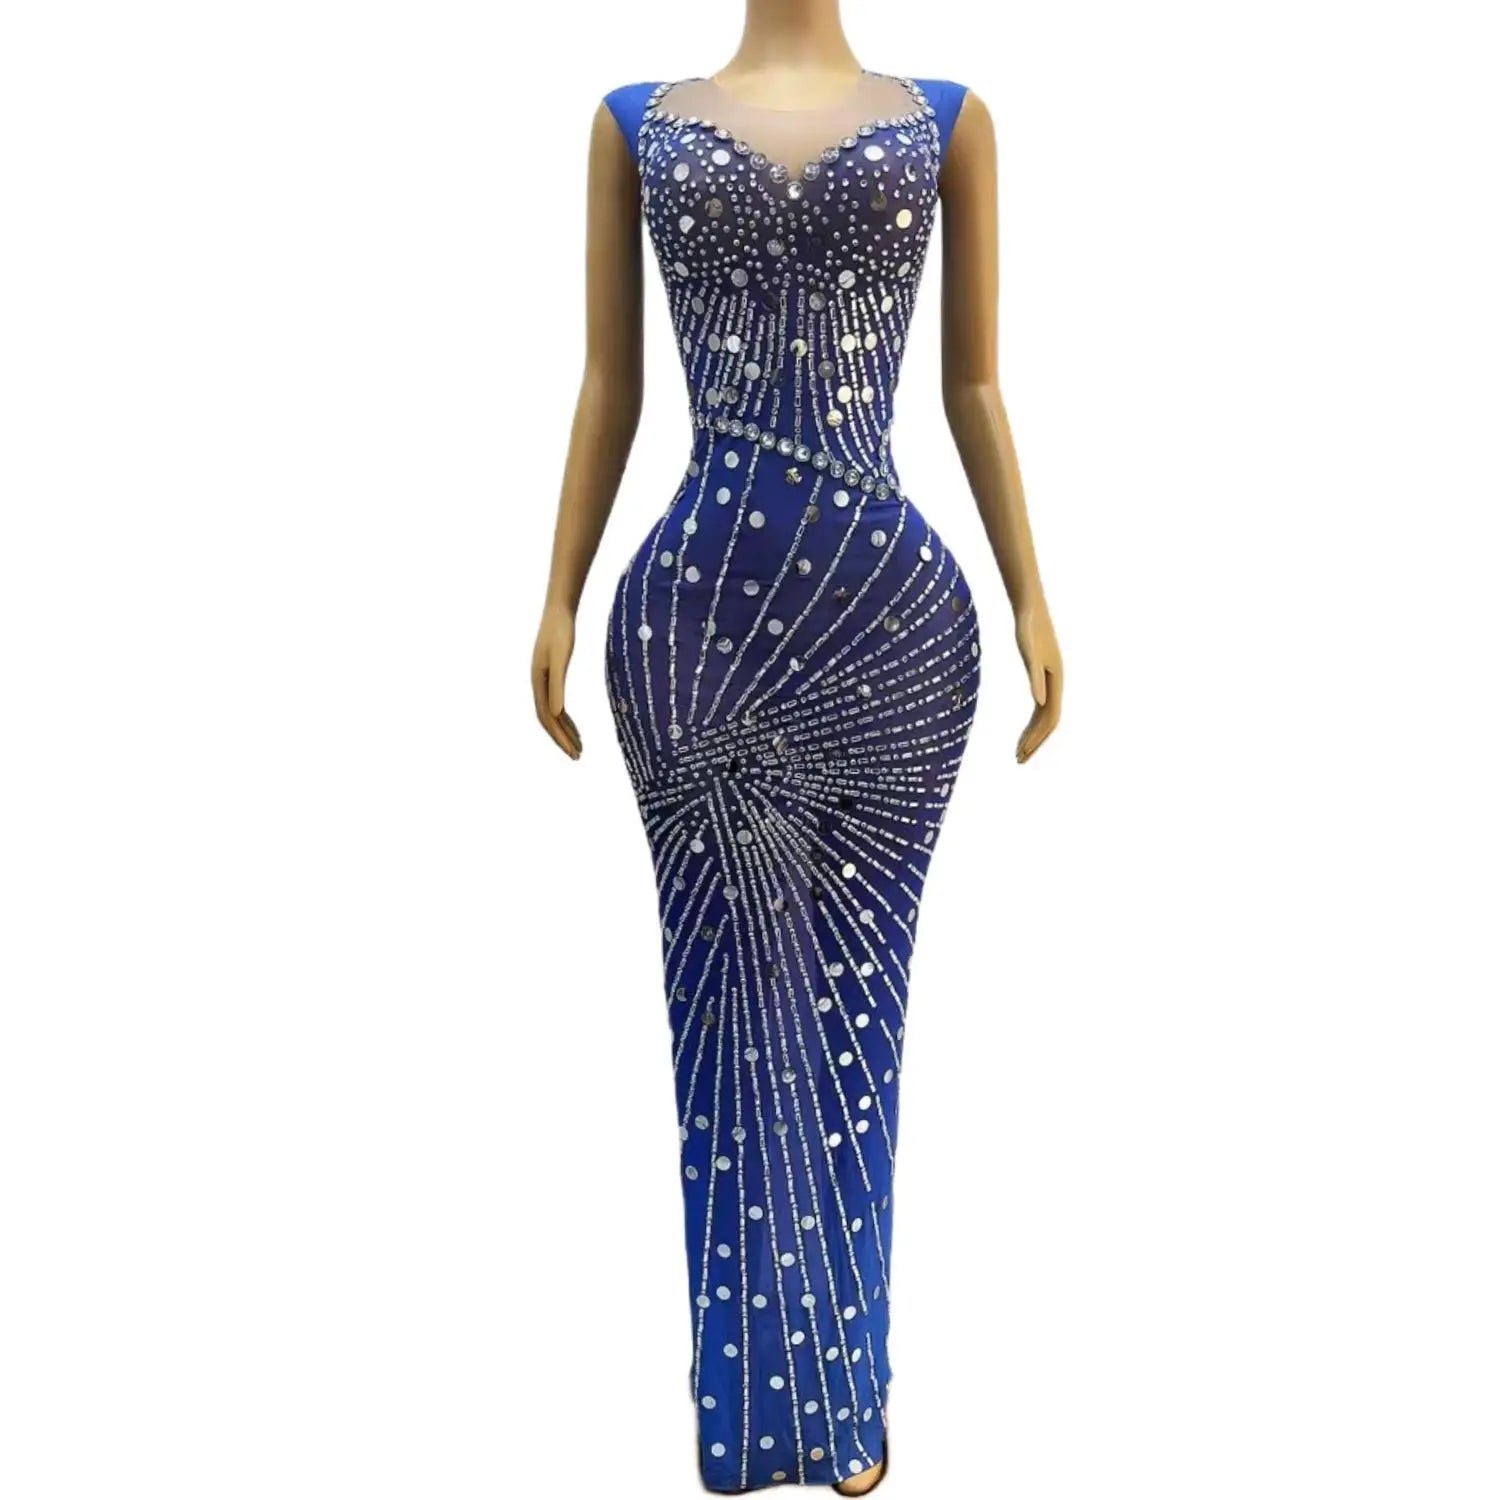 Long Evening Dresses Elegant Long Style High Slit Sparkly Silver Sequined Dress Blue Women Formal Evening Gowns